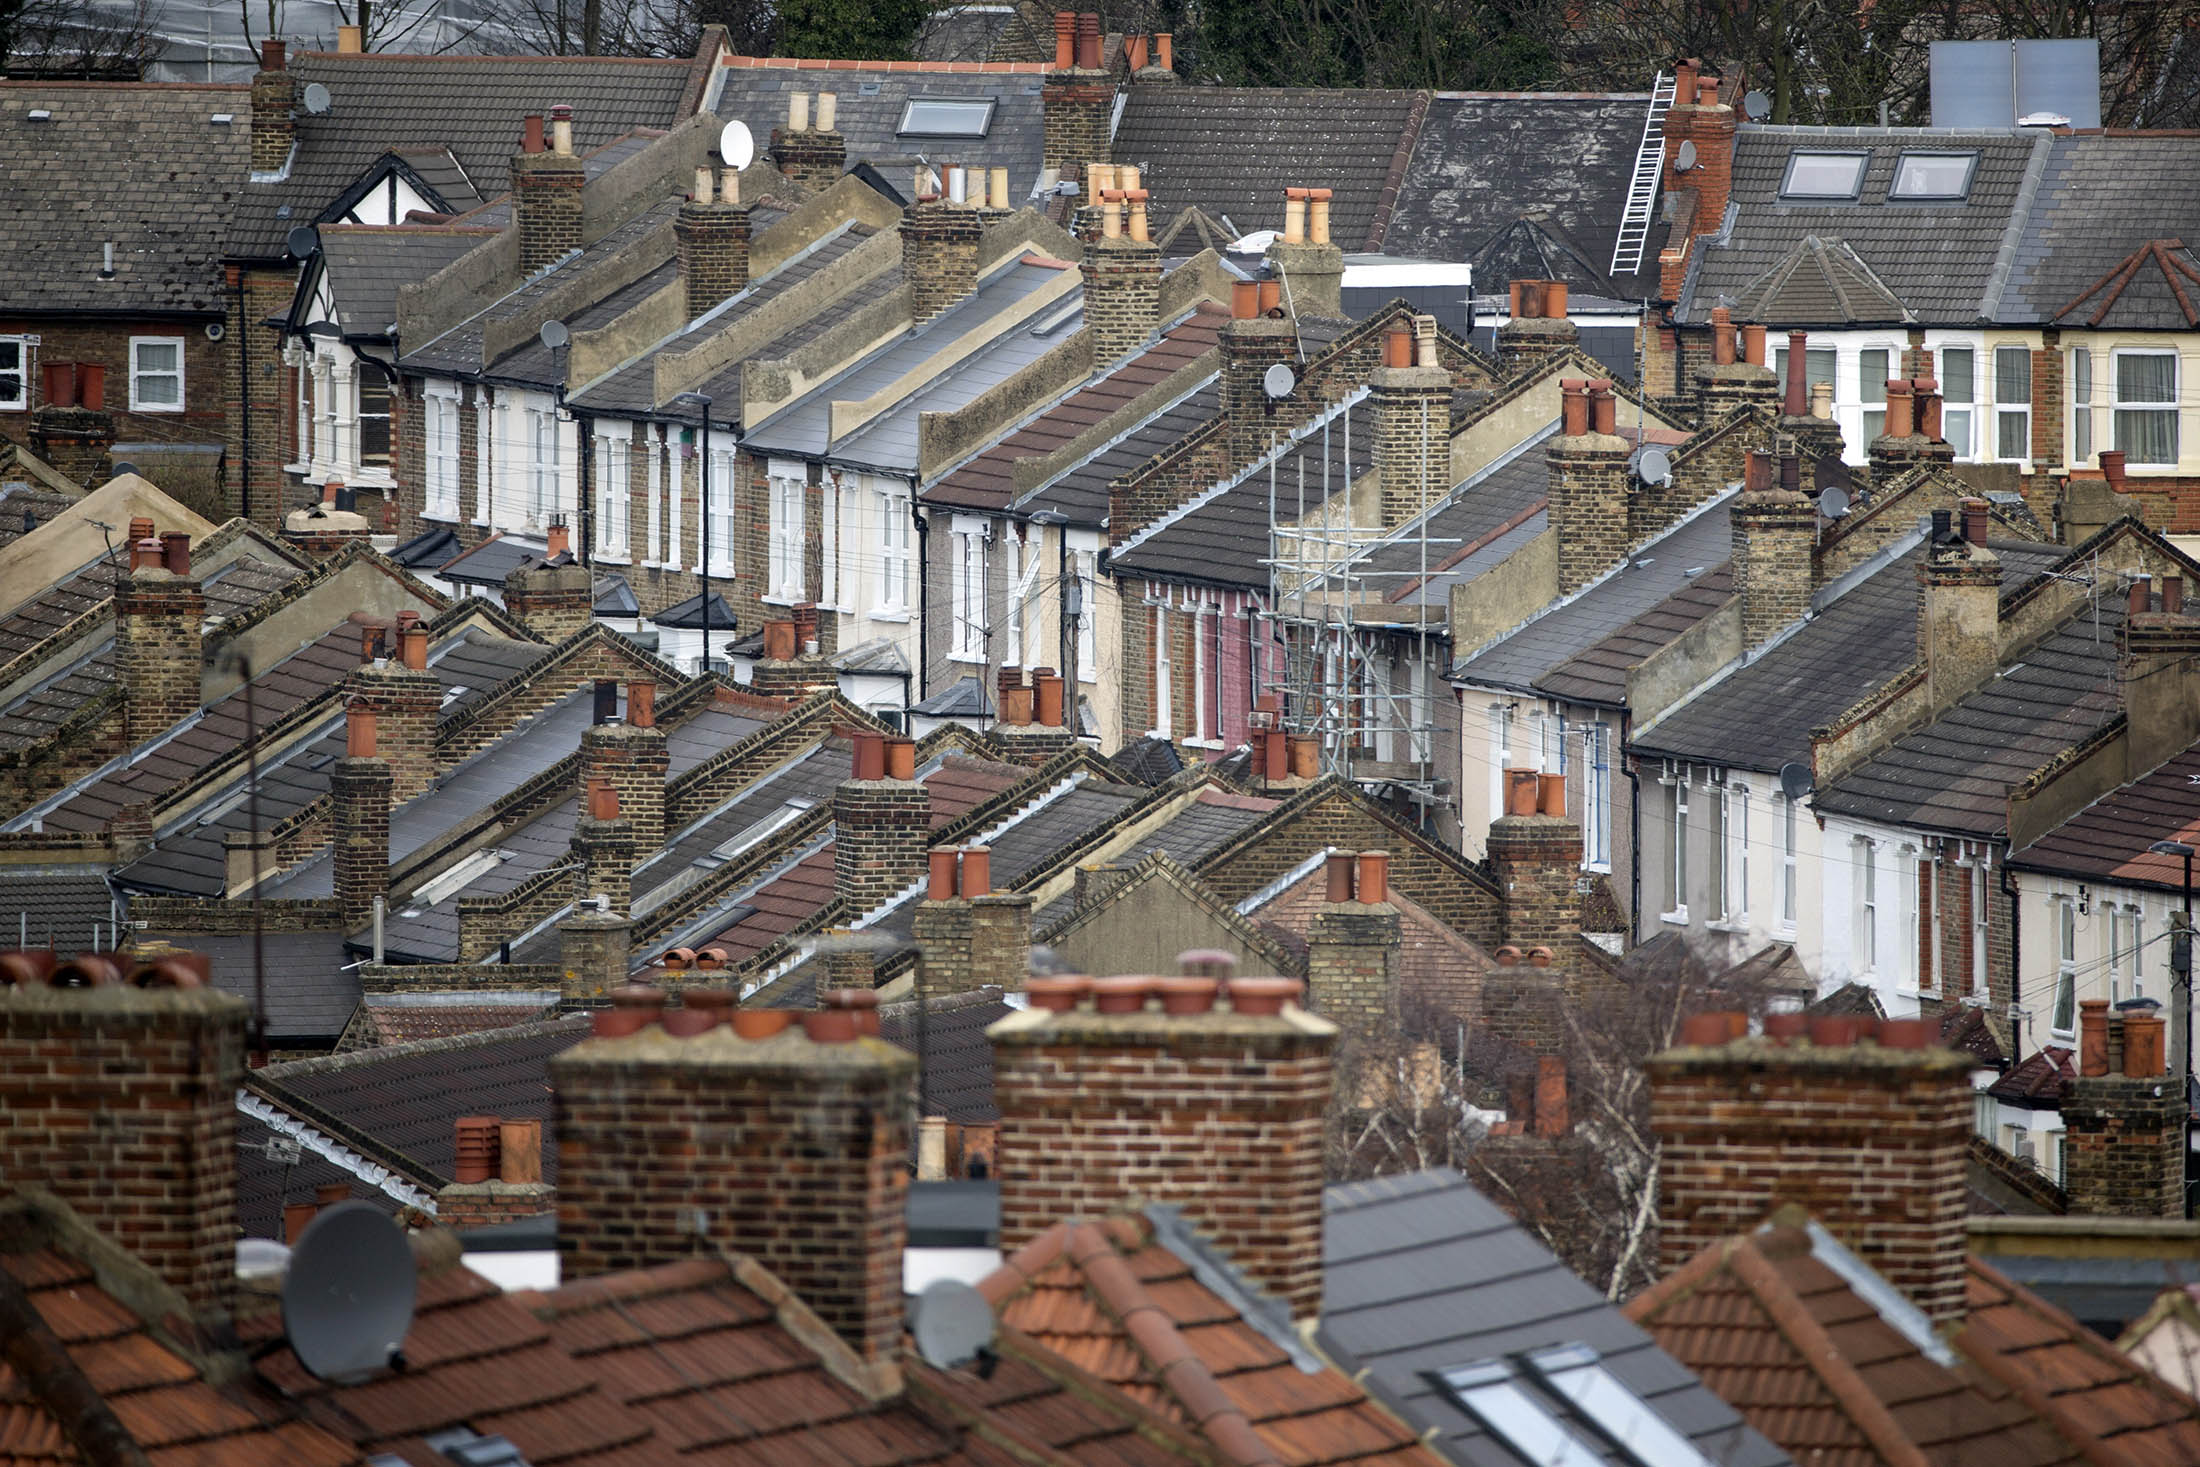 Brick chimney stacks stand on the tiled rooftops of houses on a residential street in London, U.K., on Monday, March 17, 2014. U.K. Chancellor of the Exchequer George Osborne plans to spur construction in his budget by extending the Help-to-Buy program for new homes to 2020 and fostering the expansion of a commuter town southeast of London.